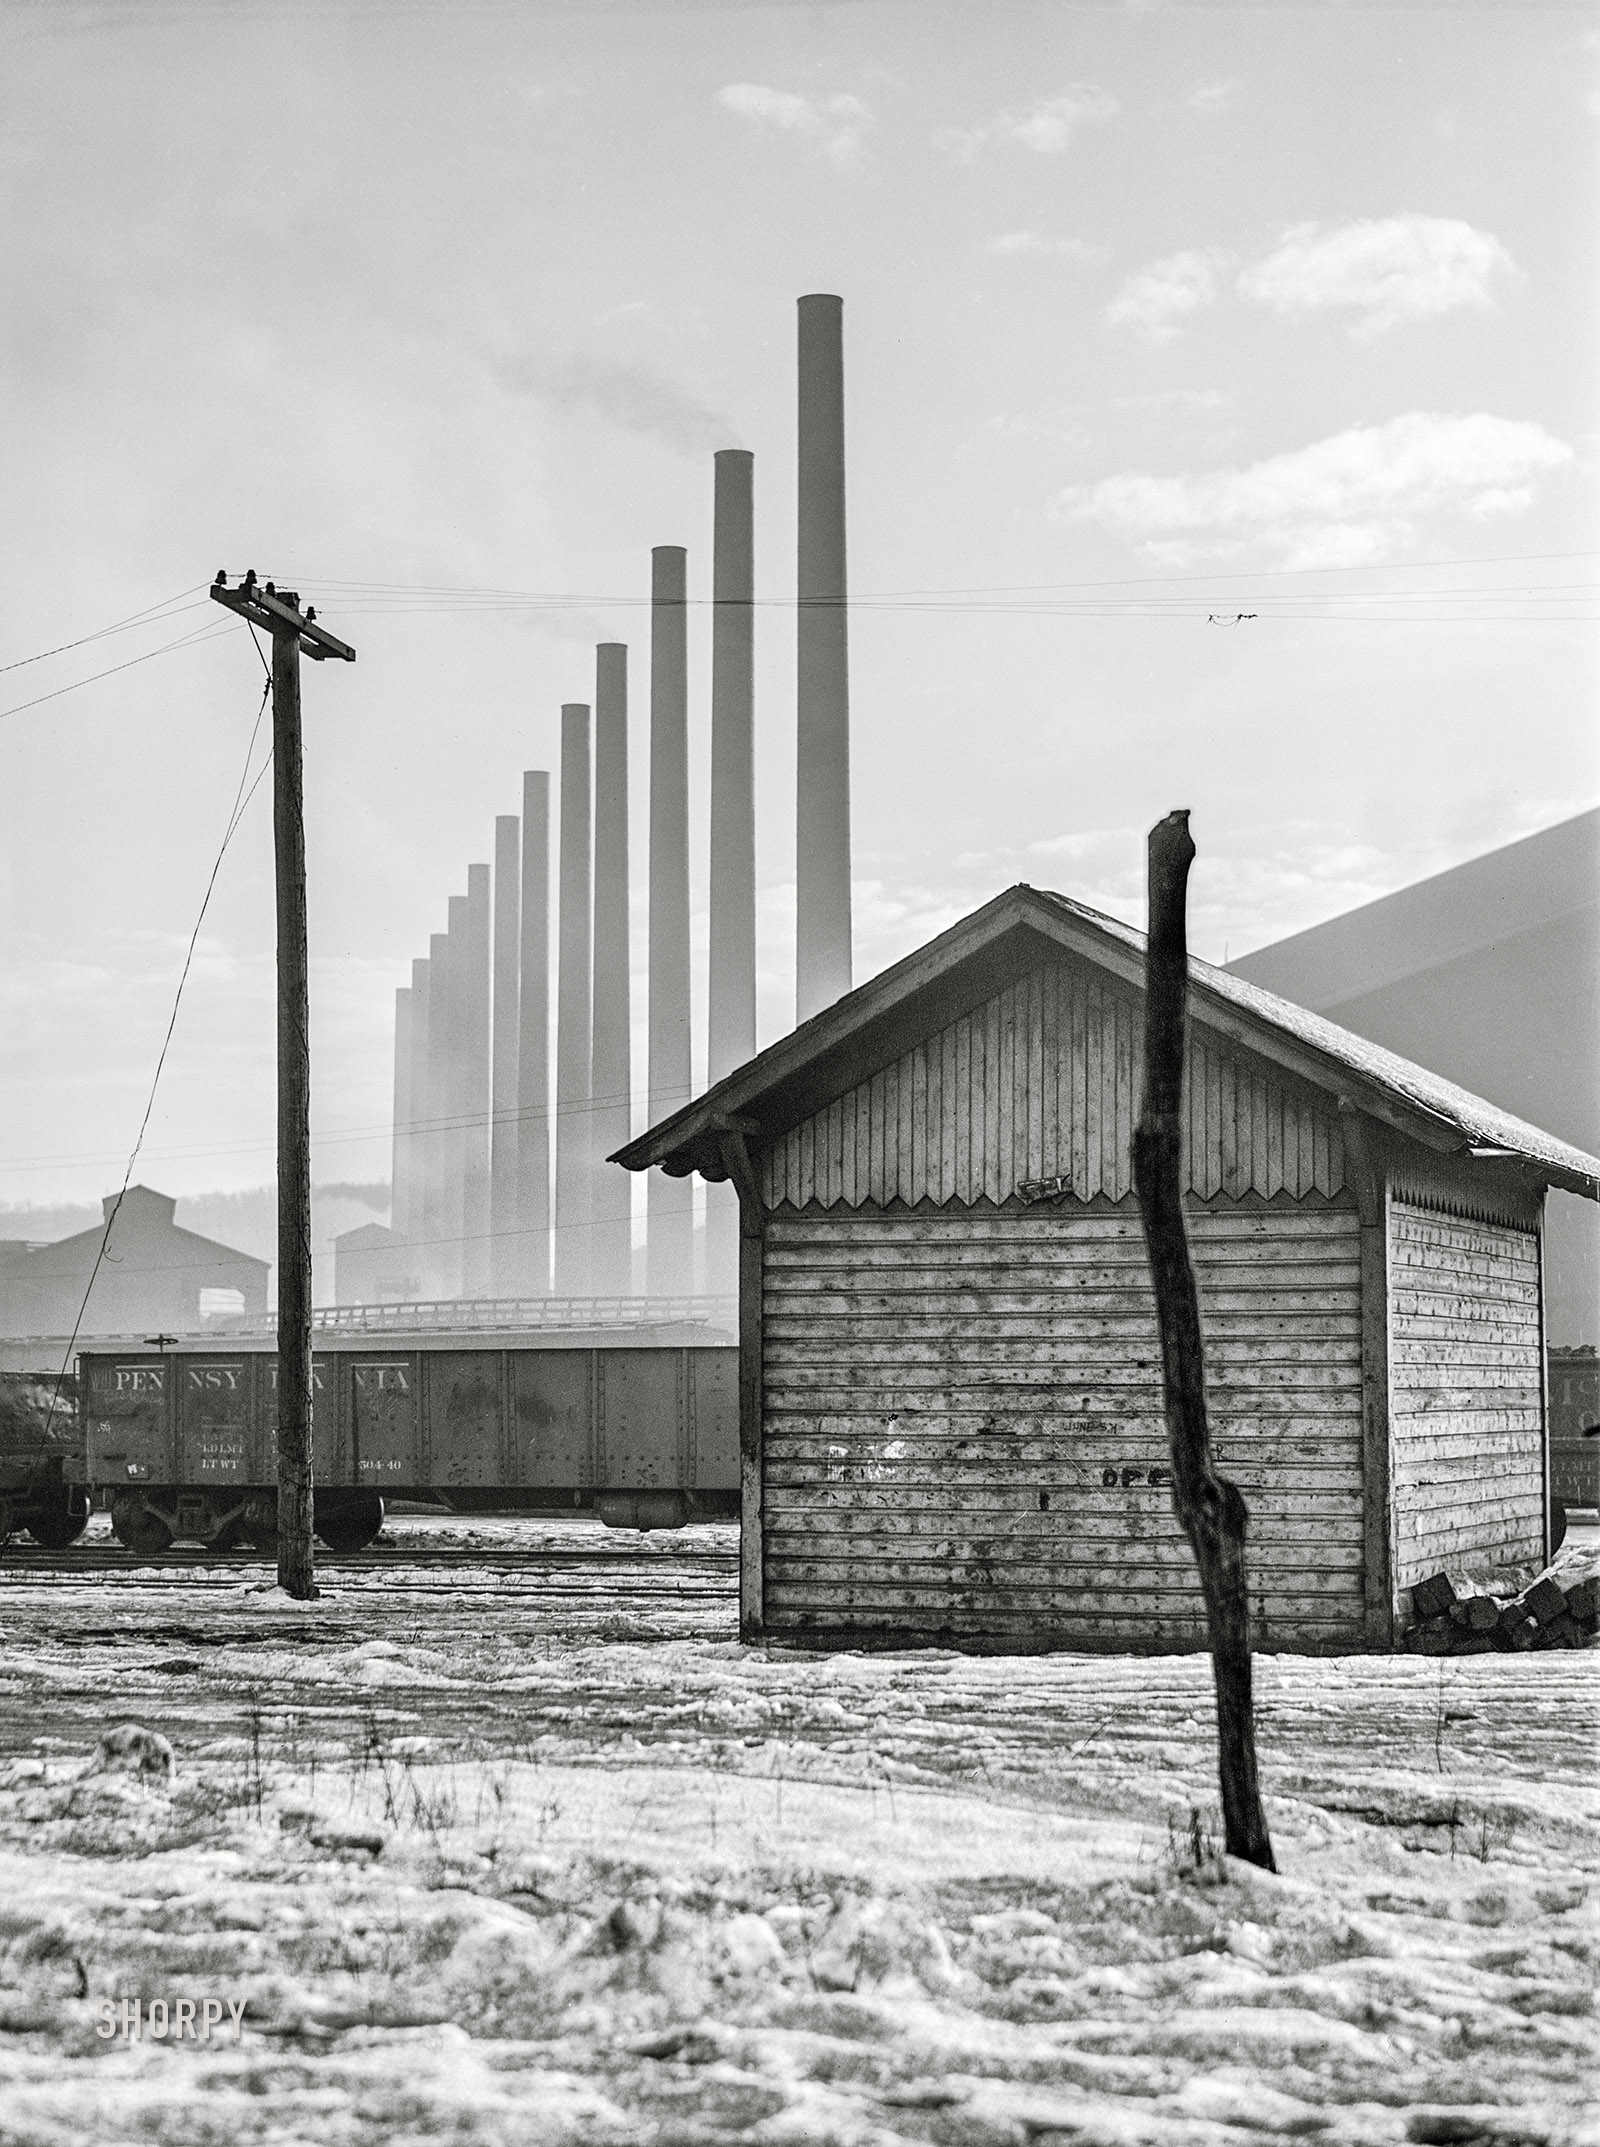 January 1941. "Stacks at the Pittsburgh Crucible Steel Company in Midland, Pennsylvania." Medium format negative by Jack Delano for the Farm Security Administration. View full size.